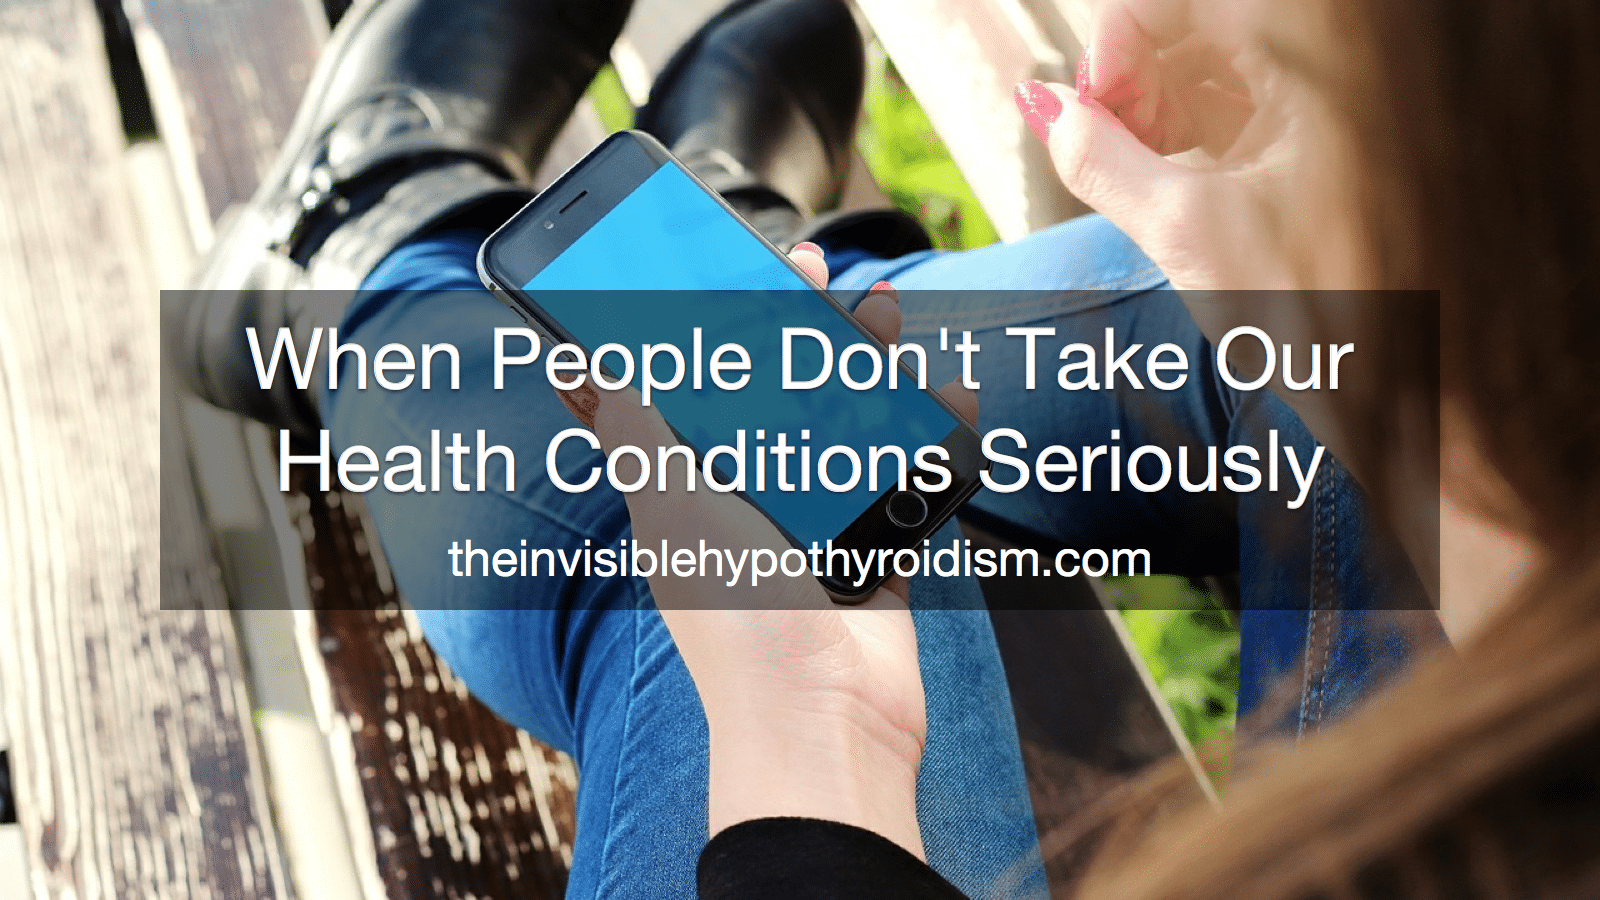 When People Don't Take Our Health Conditions Seriously